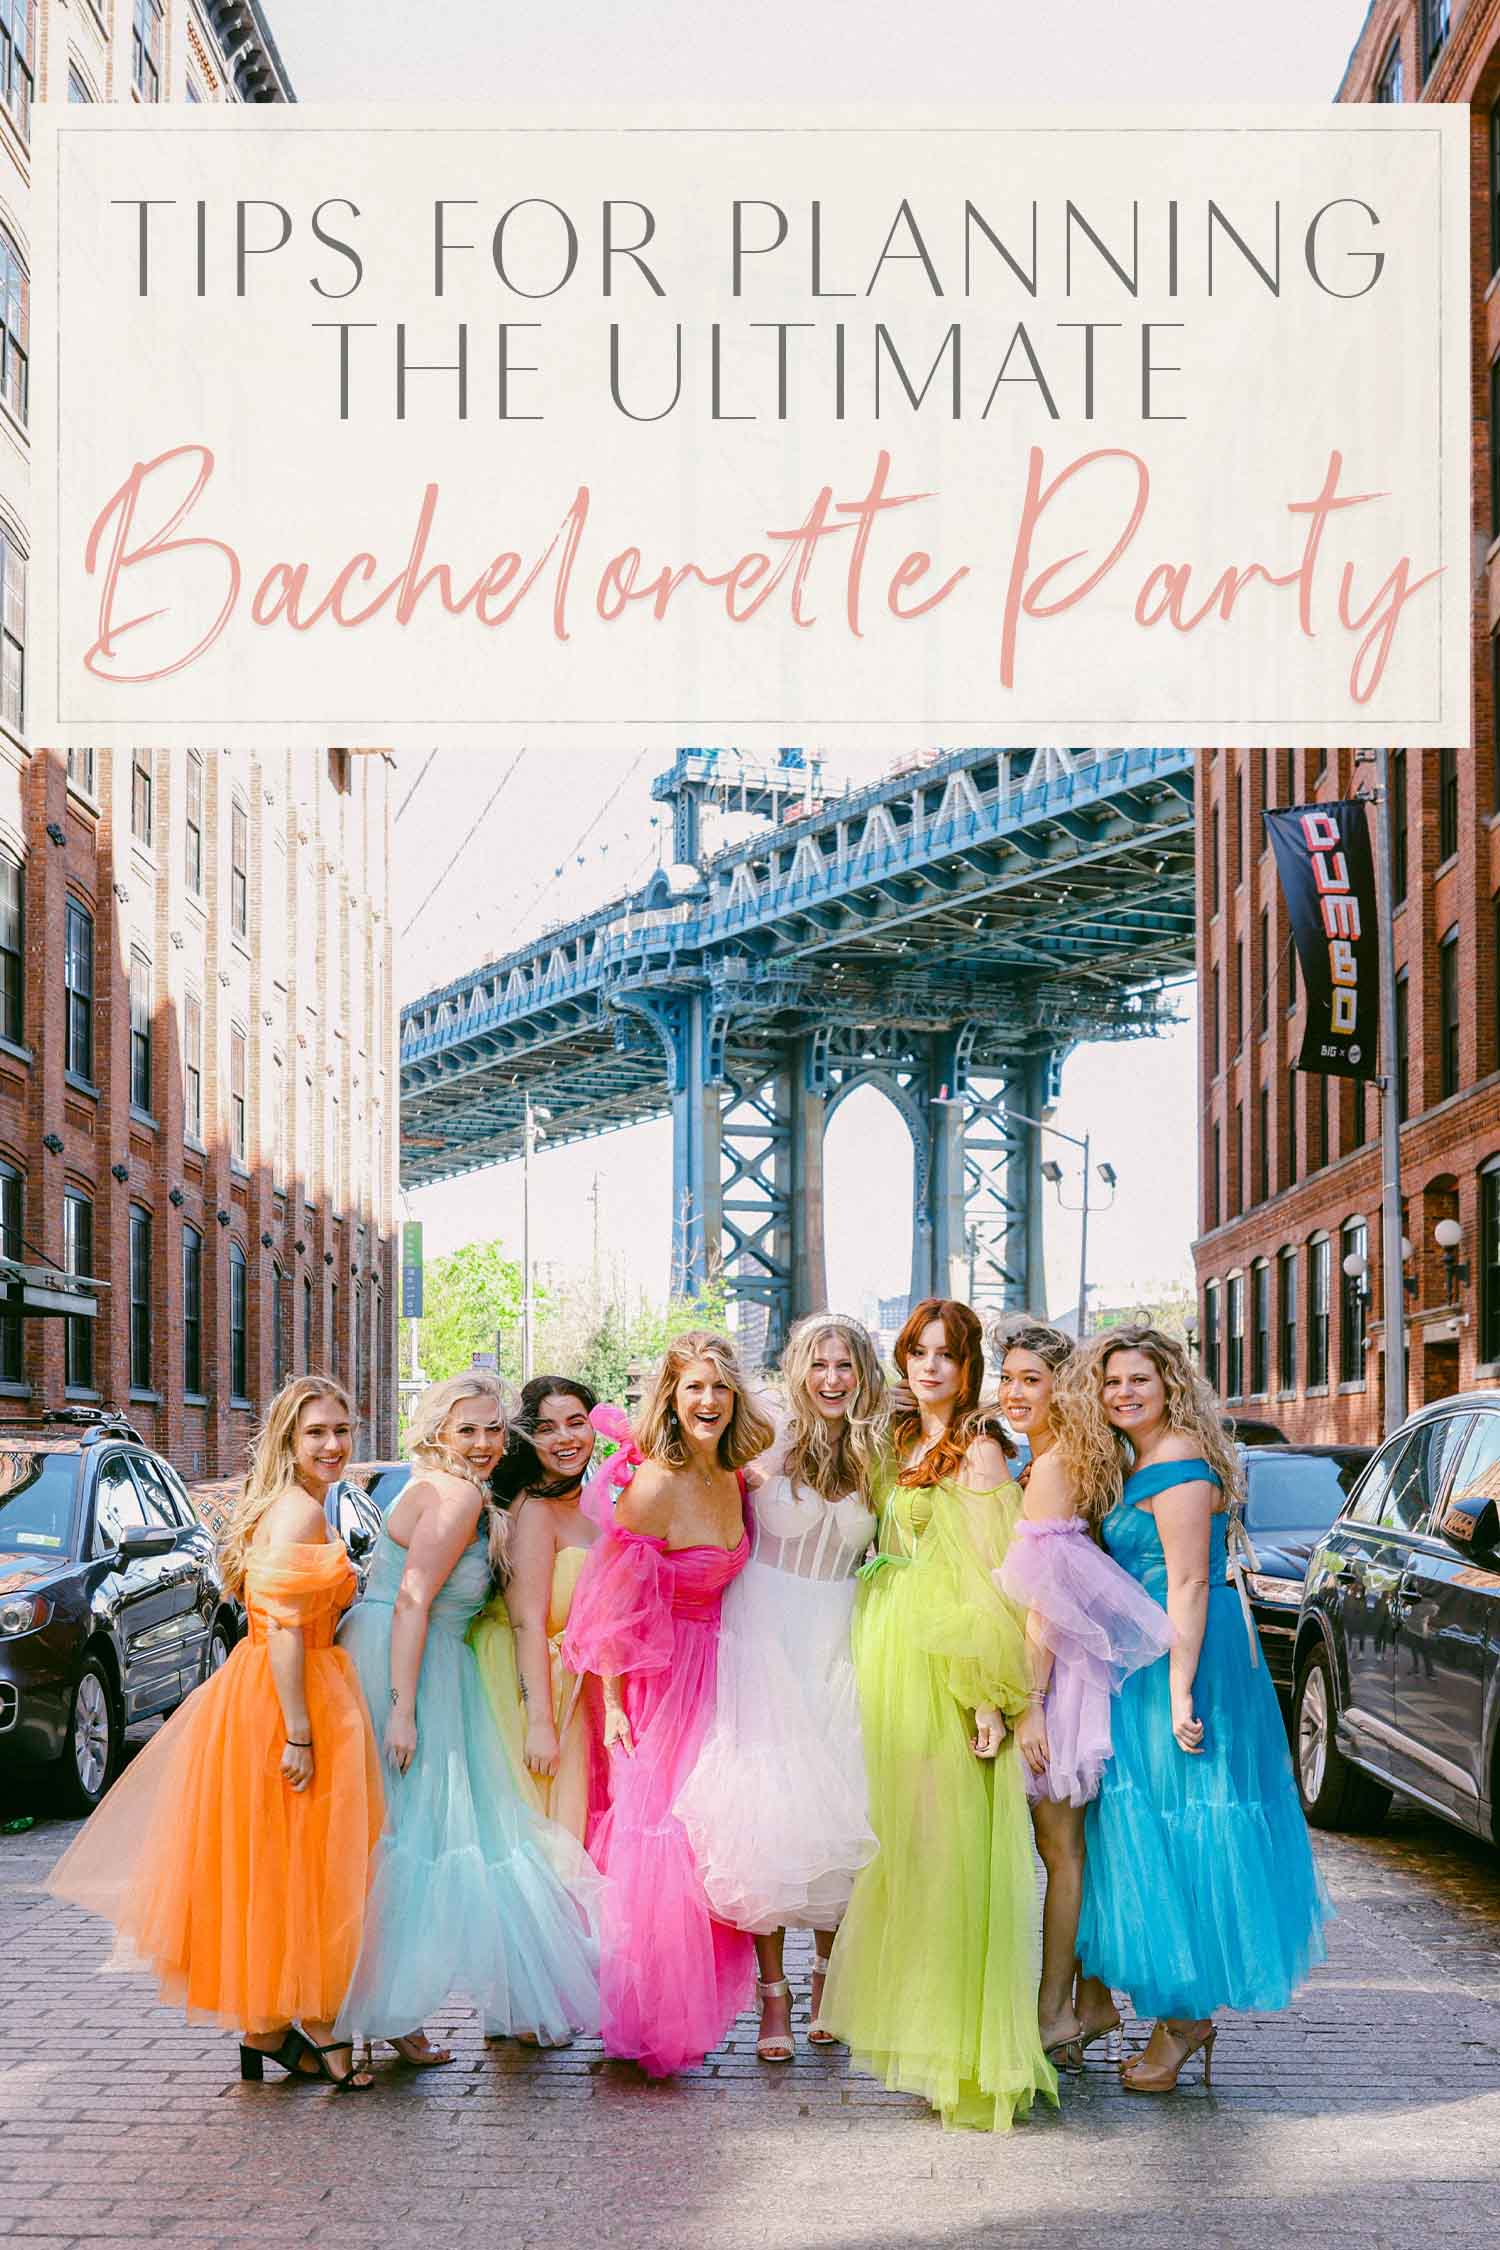 Tips for Planning Ultimate Bachelorette Party